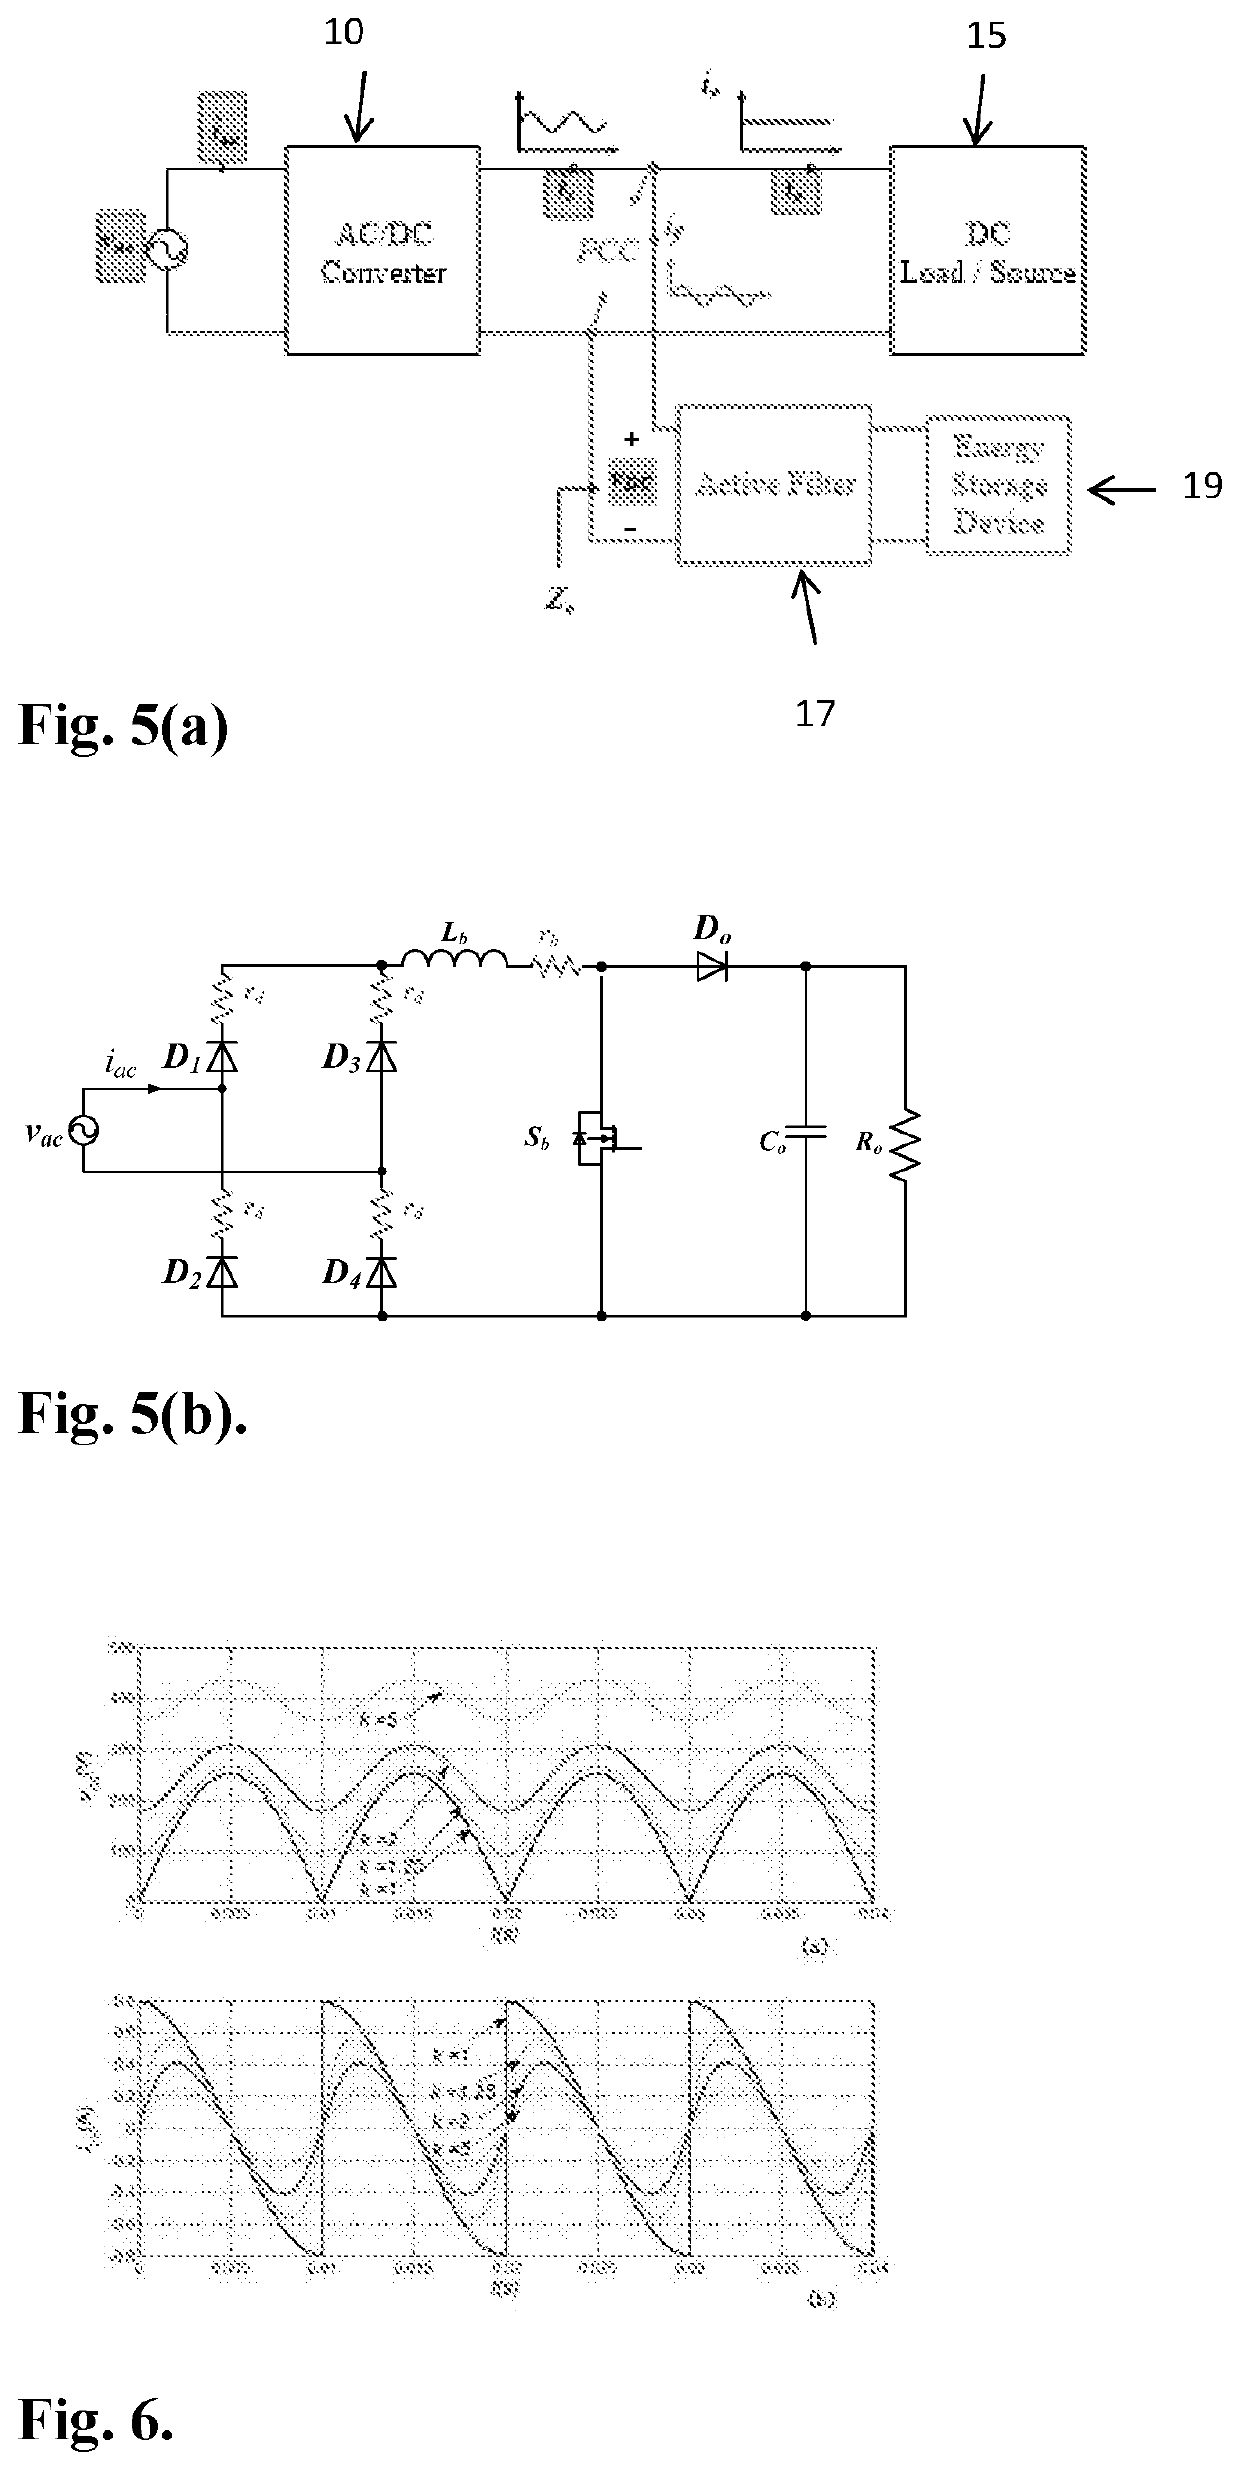 Plug-and-play ripple pacifier for DC voltage links in power electronics systems and DC power grids